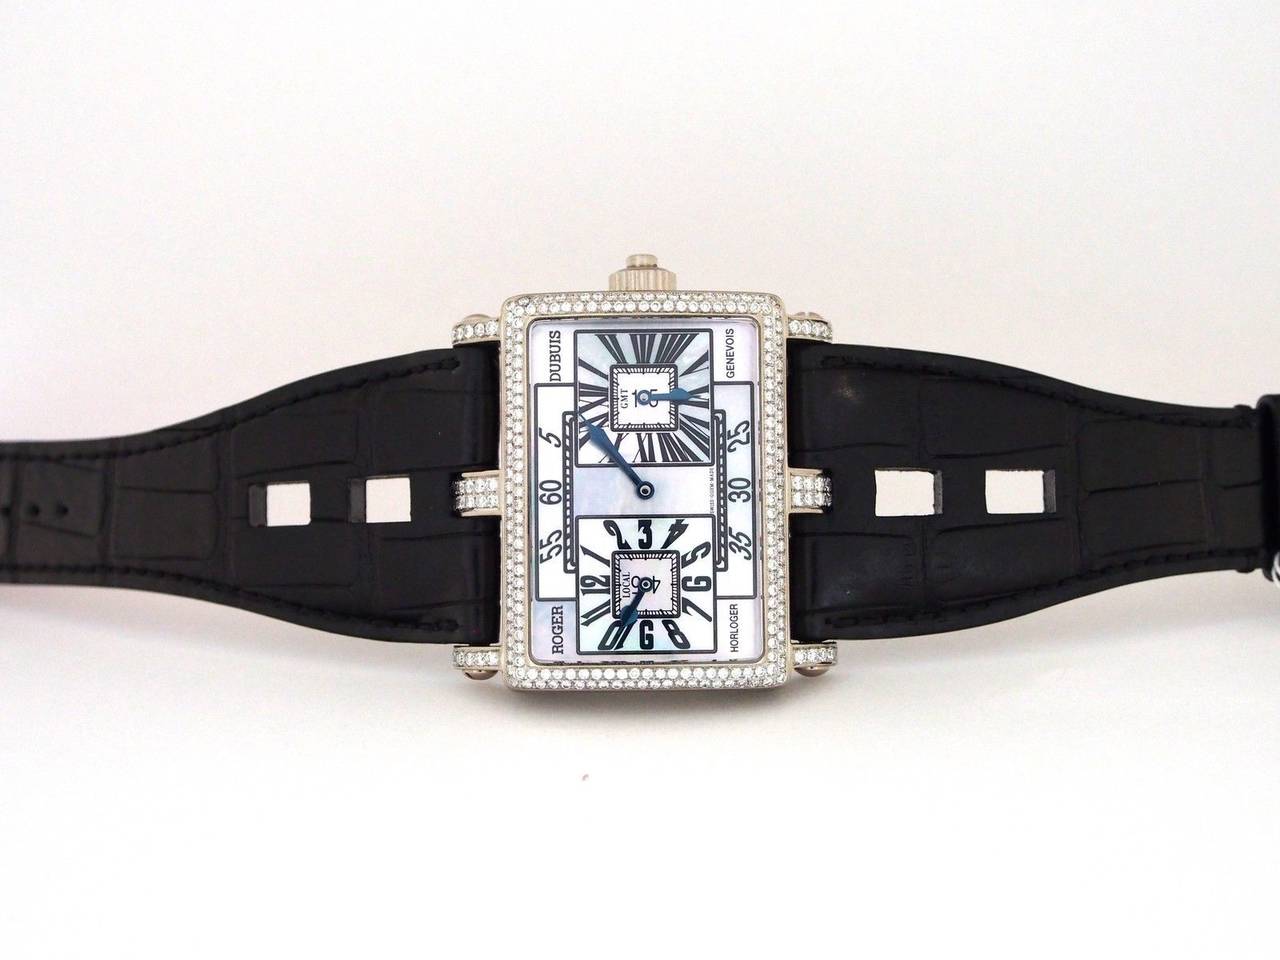 Brand Name  Roger Dubuis  
Style Number  T319847056.37  
Also Called  T31 9847 0 56.37  
Series  Too Much GMT Bi-retrograde  
Gender  Gents  
Case Material  18k White Gold w/ Diamonds  
Dial Color  Mother of Pearl  
Movement  Manual Wind 